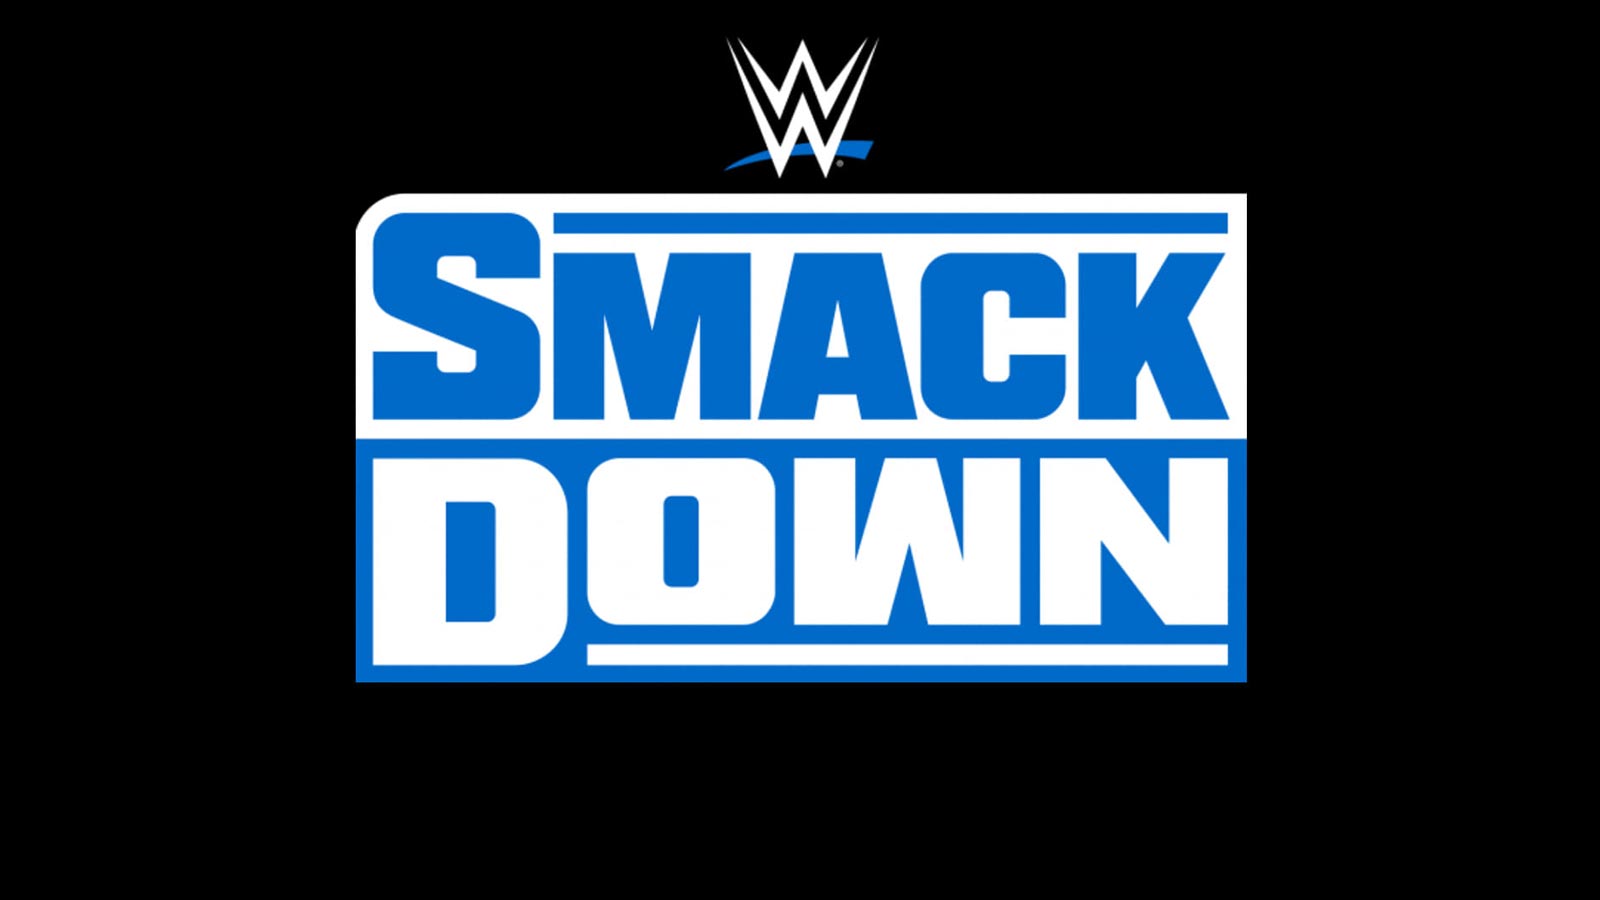 WWE Friday Night Smackdown : Heading Into Perth